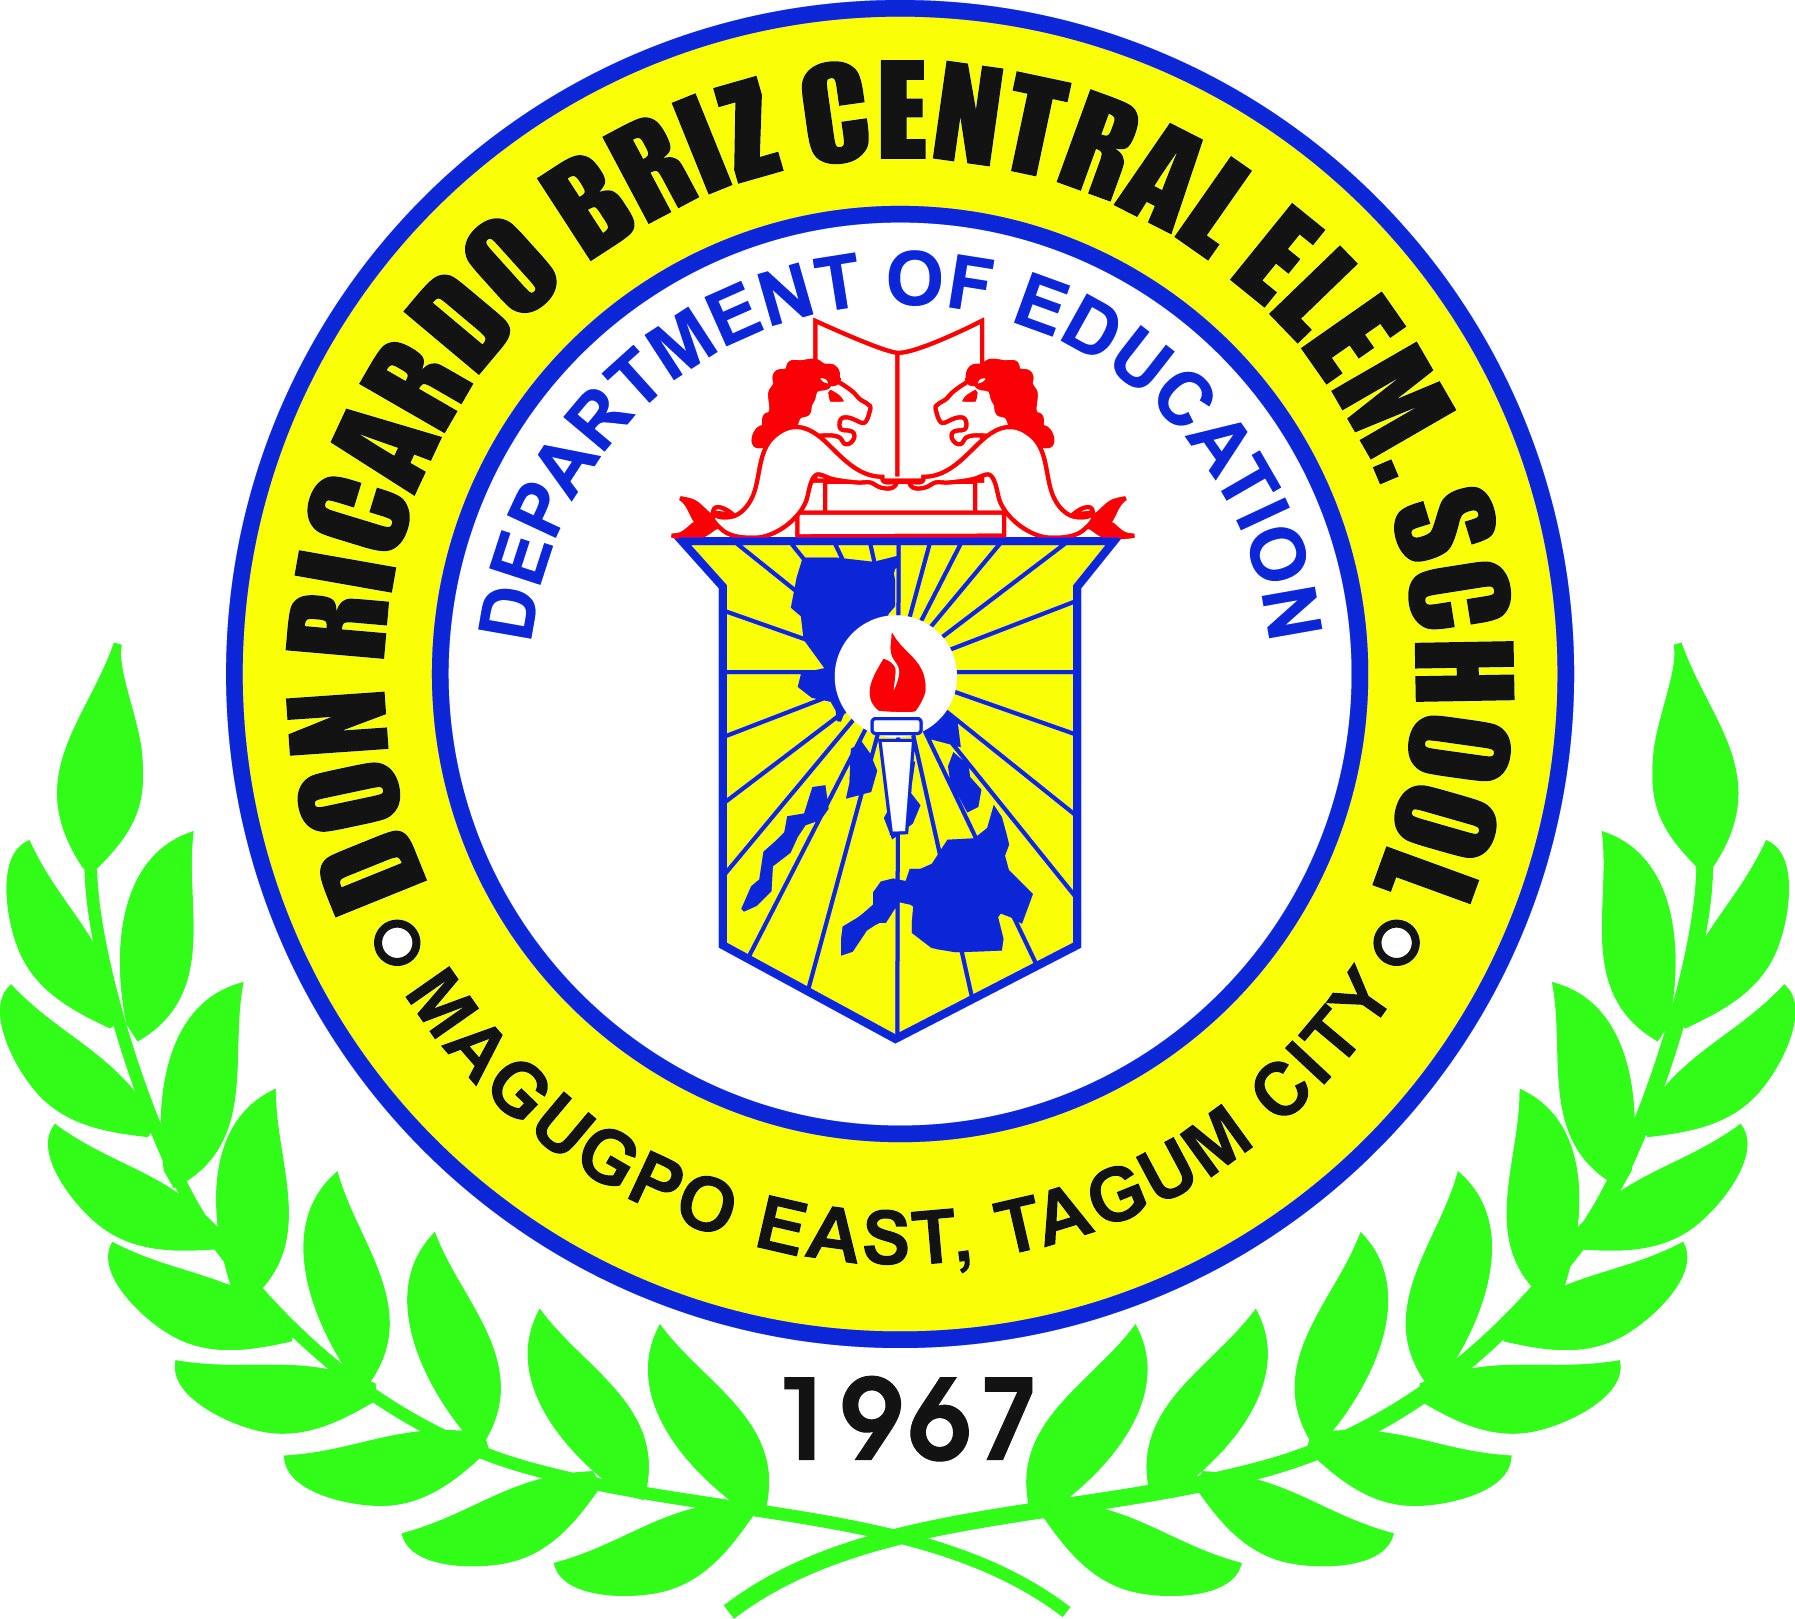 You are currently viewing Don Ricardo Briz Central Elementary School (DRBCES)